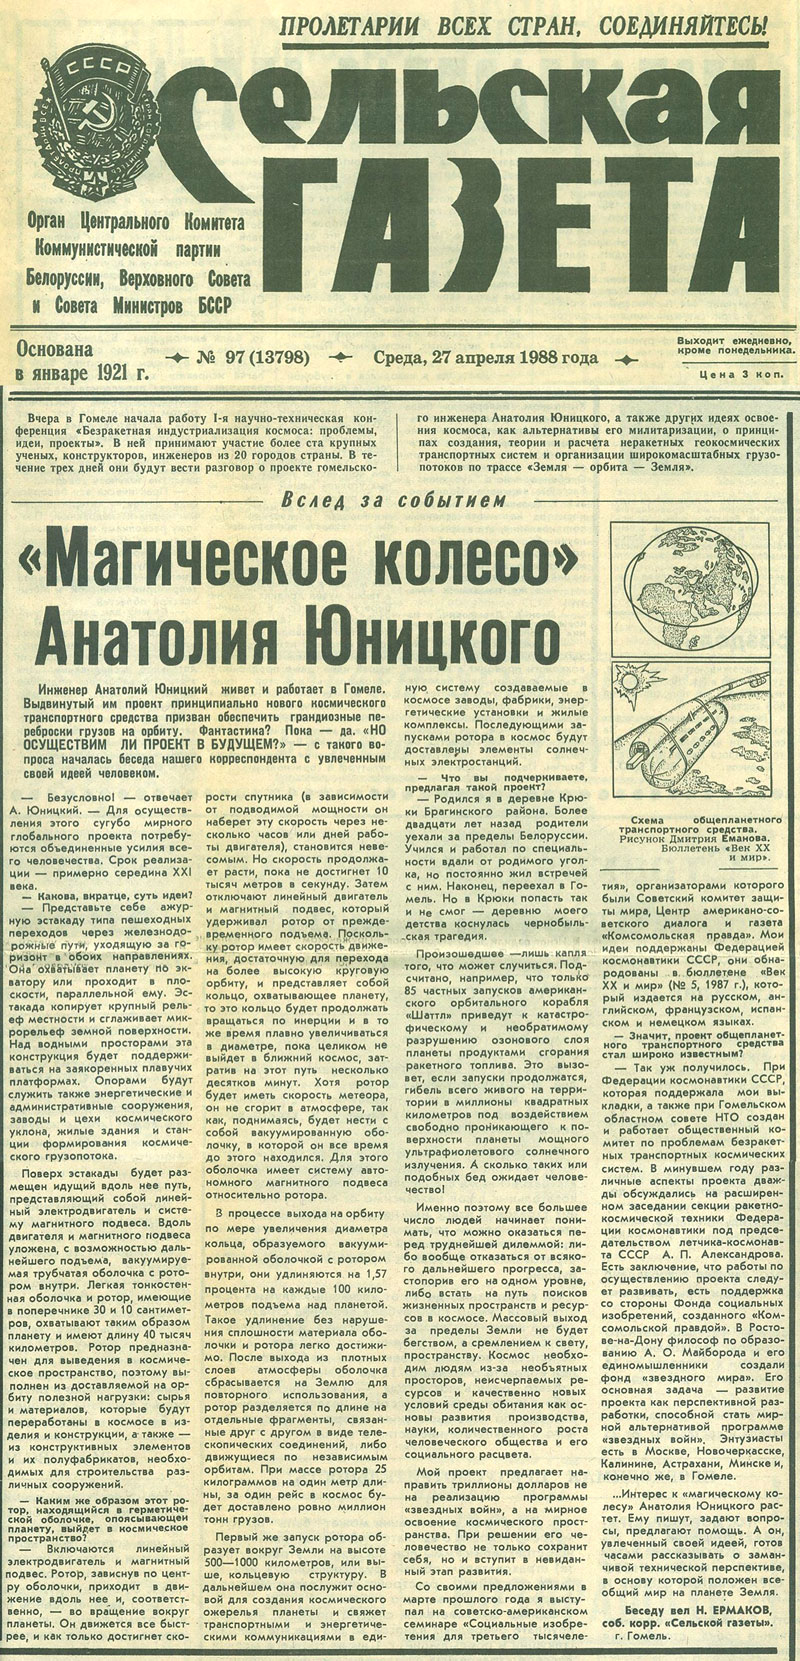 The interview with Anatoly Yunitskiy published in the issue of the newspaper Selskaya Gazeta of April 27, 1987